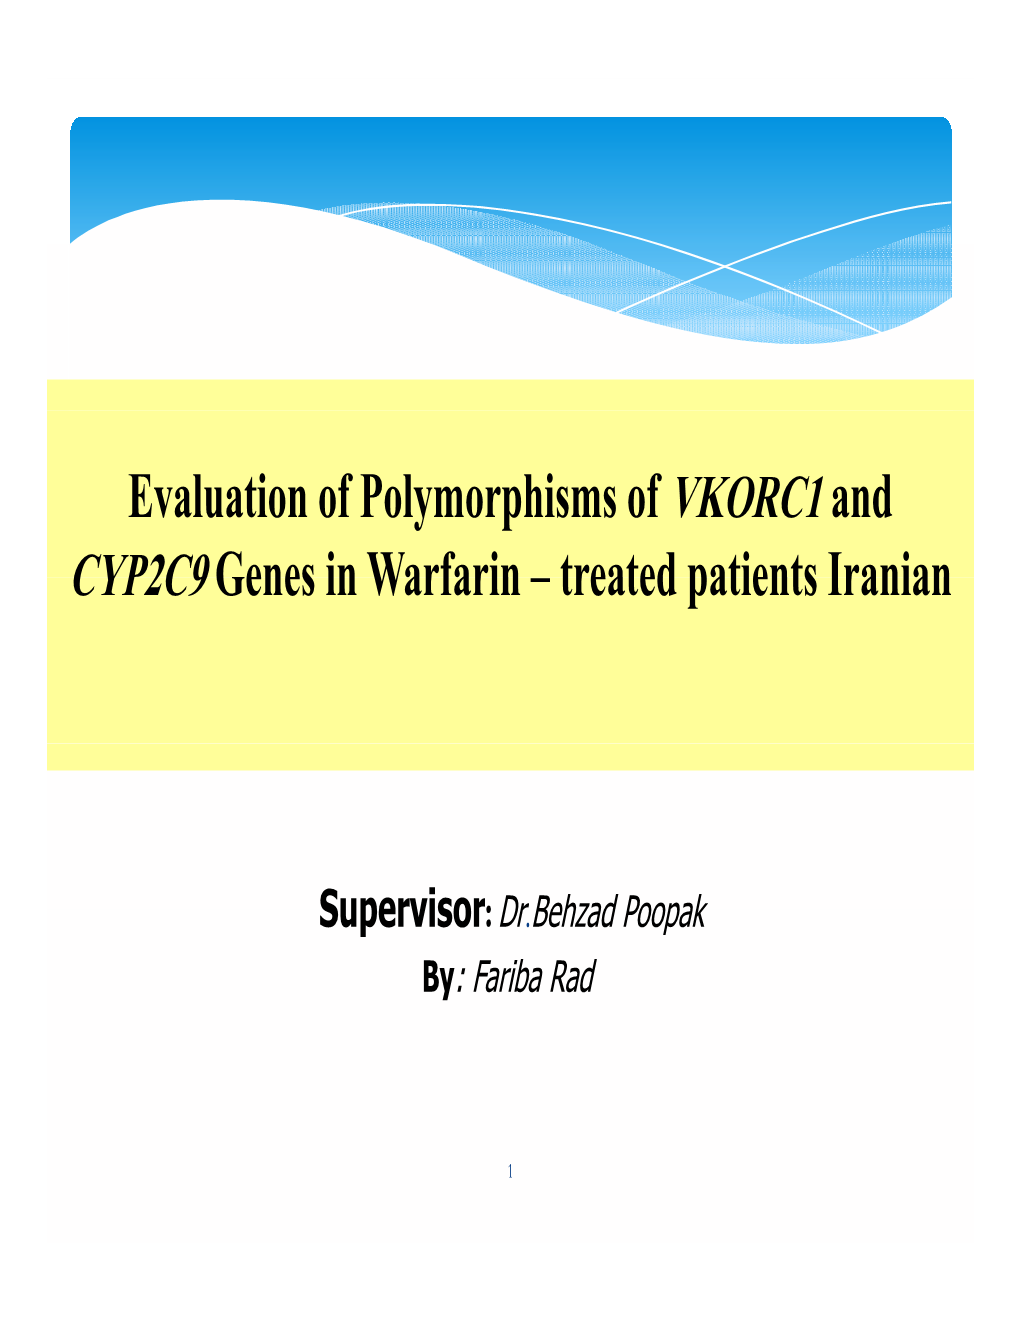 Evaluation of Polymorphisms of VKORC1 and CYP2C9 Genes in Warfarin – Treated Patients Iranian